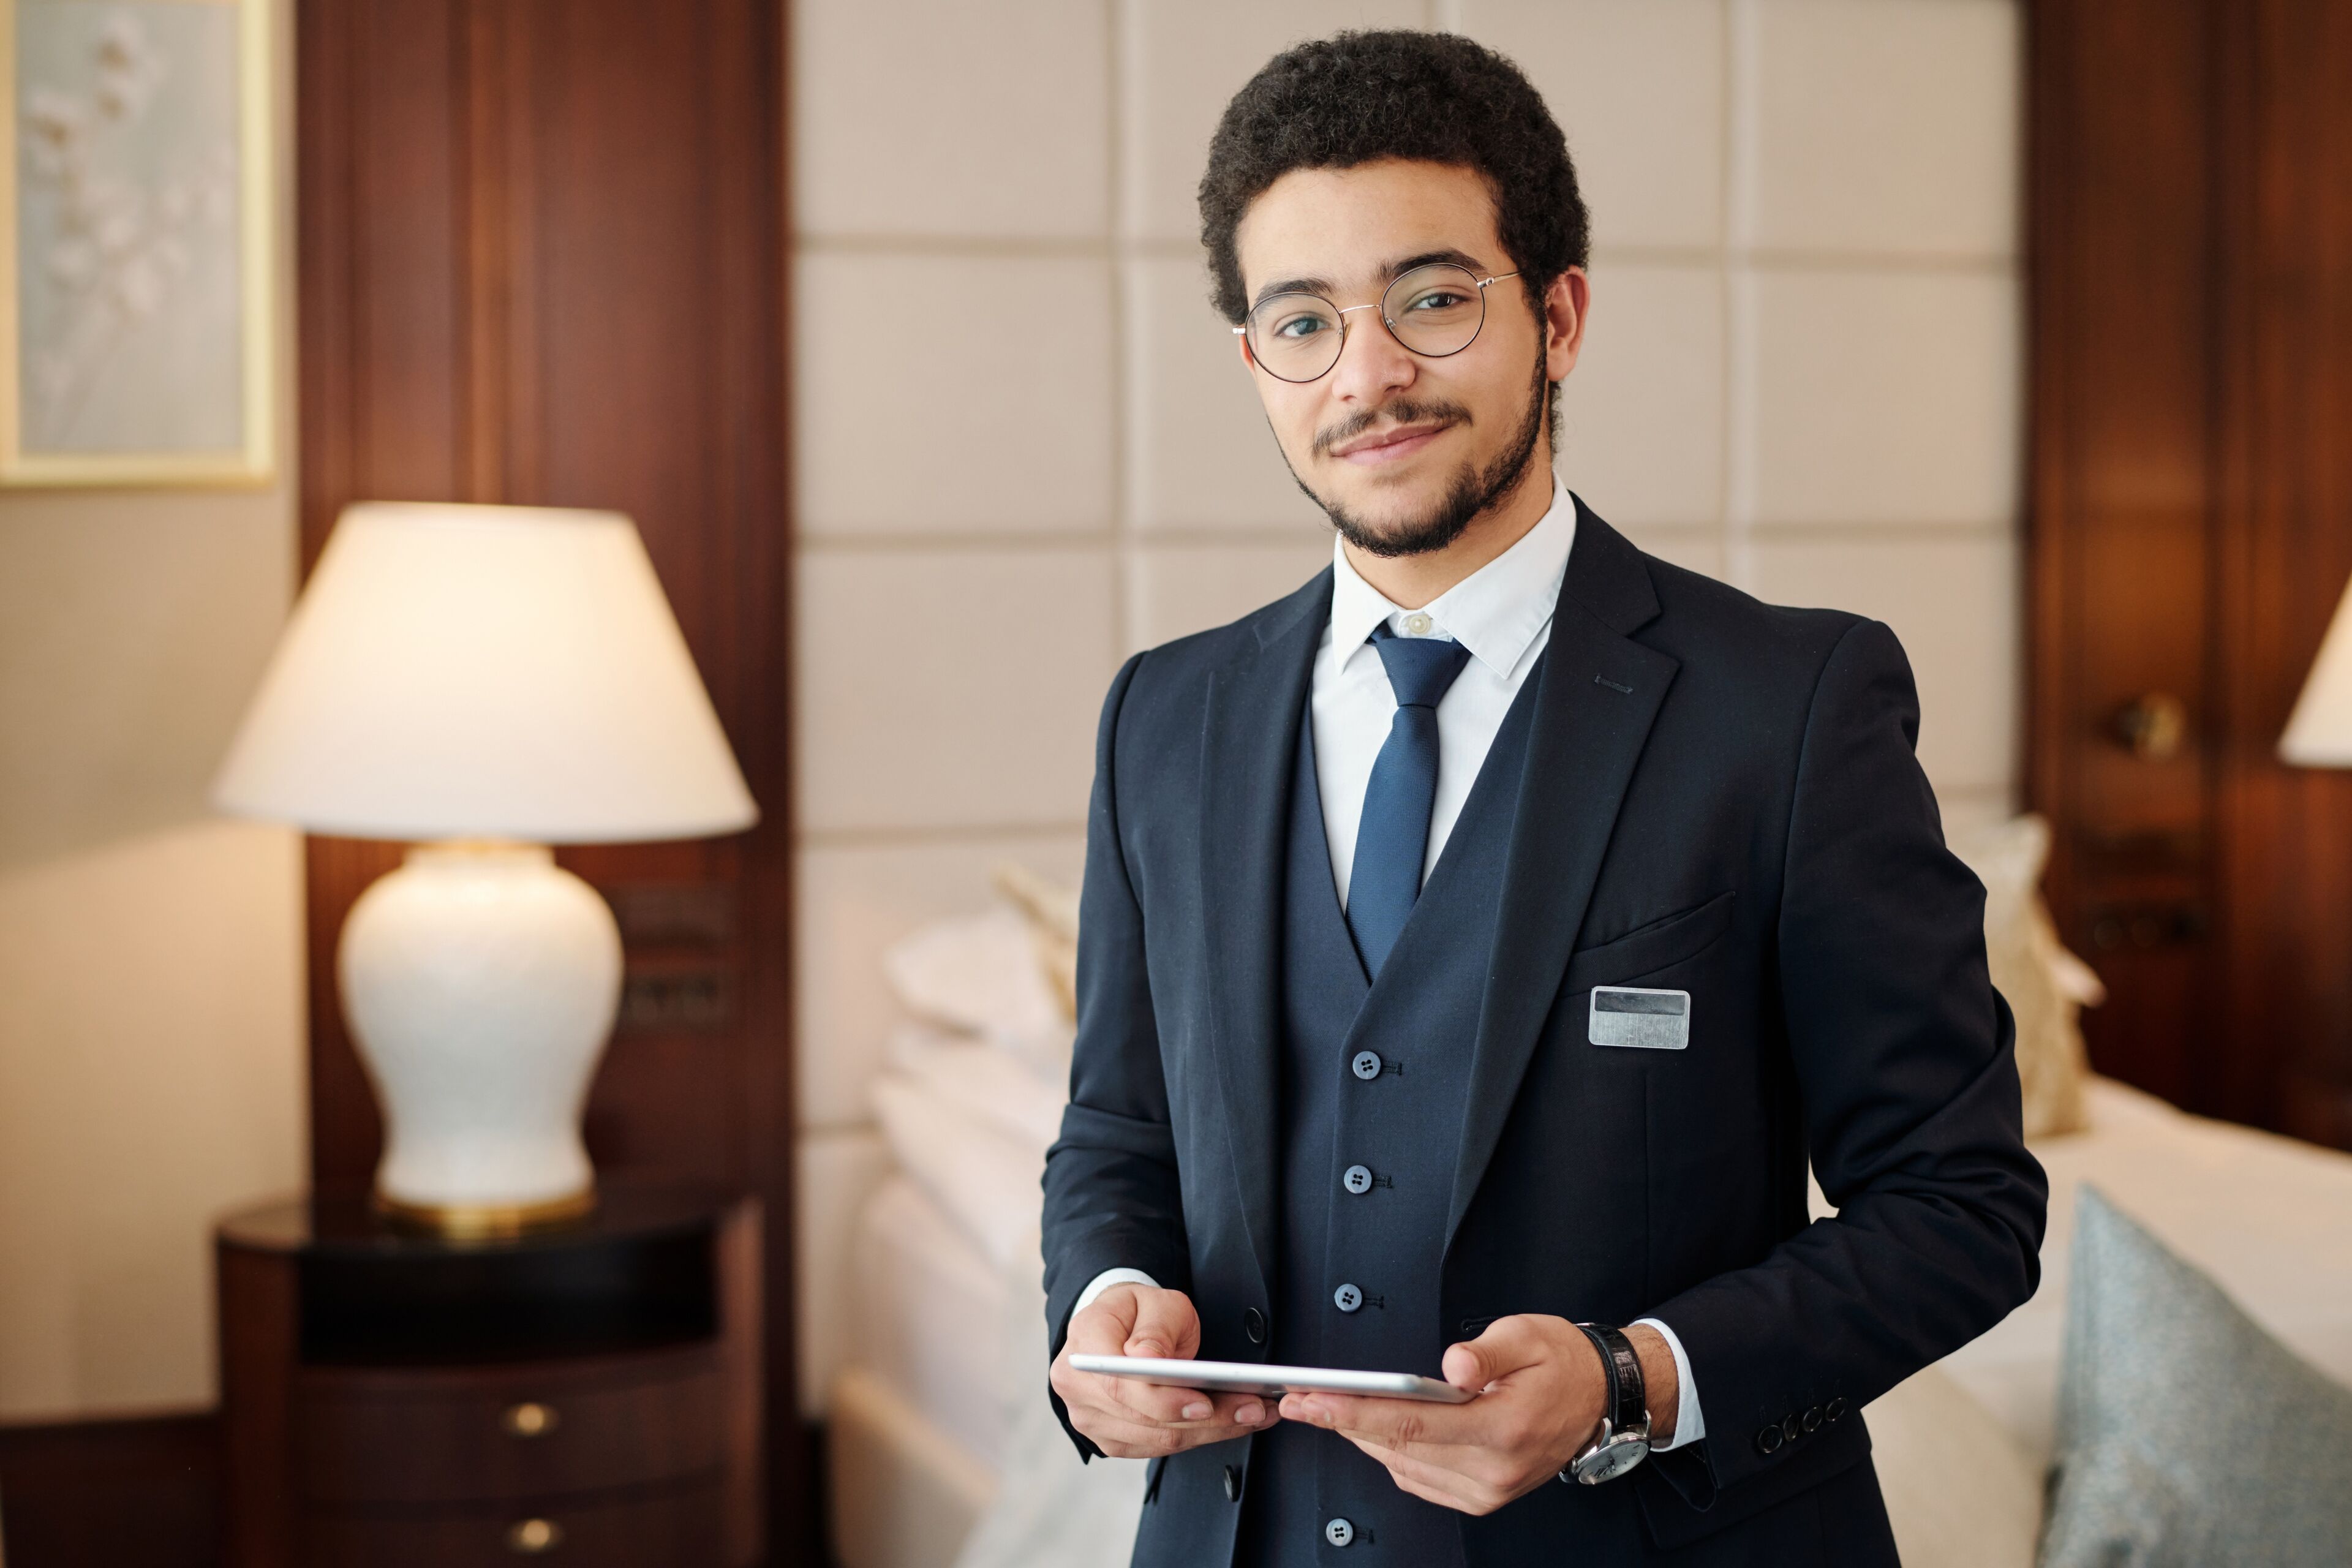 A professional male concierge in a tailored suit stands with a welcoming smile, holding a digital tablet in a luxurious hotel room.